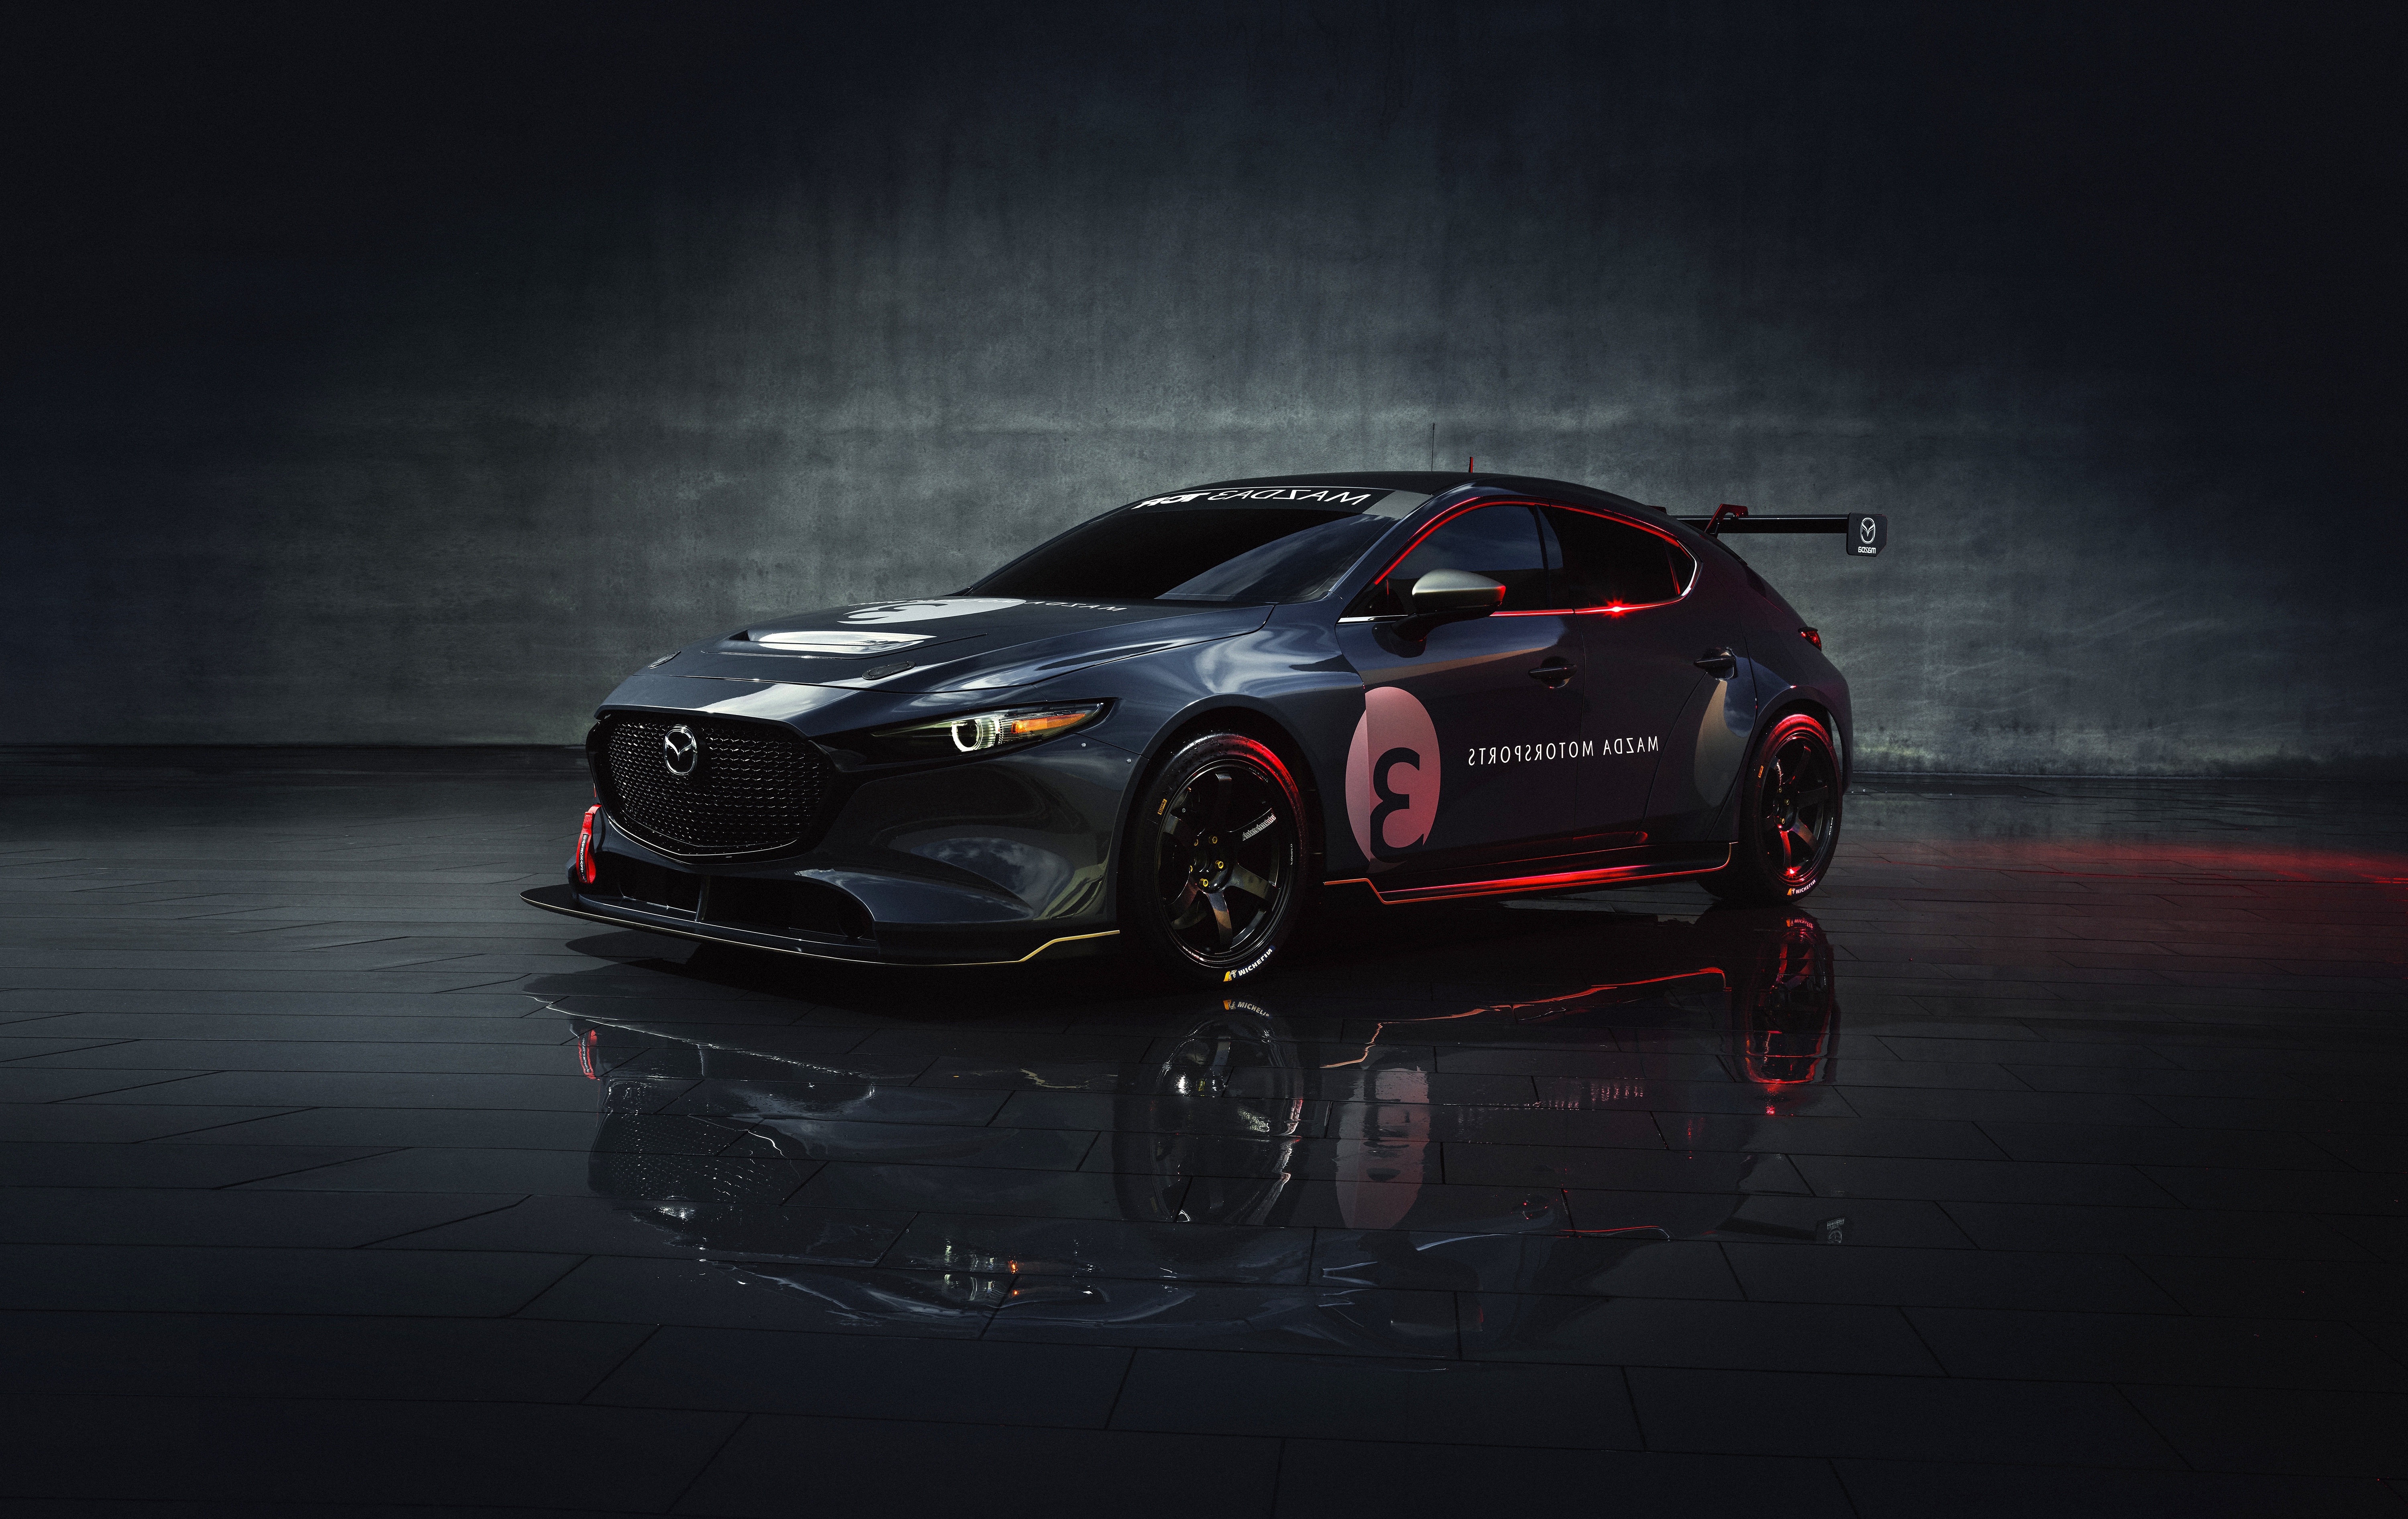 Wallpaper Racing Cars Mazda 3 Tcr Side View Resolution 6000x3784 Wallpx